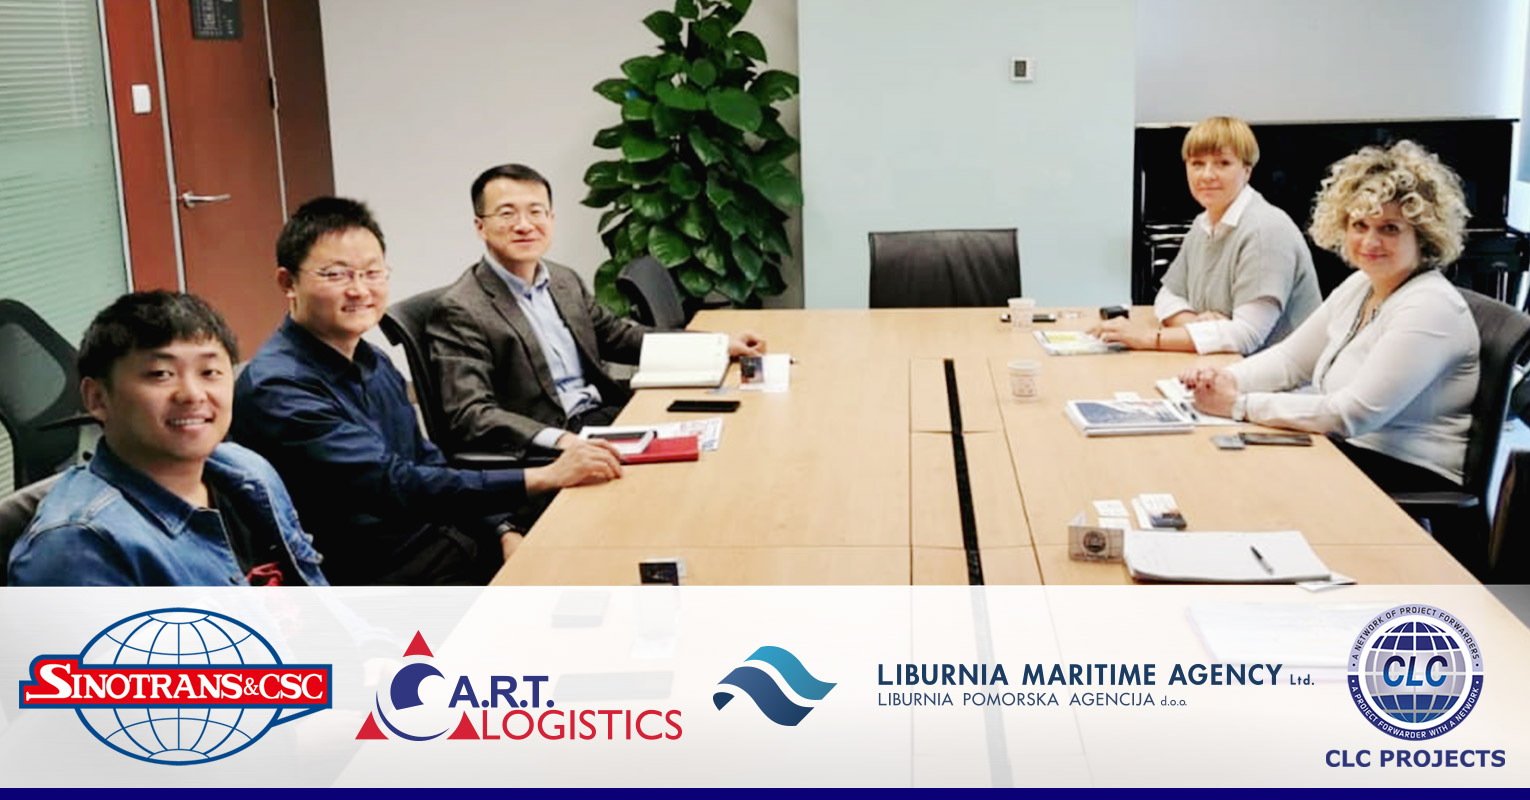 Sinotrans Project Logistics Beijing, A.R.T. Logistics, Liburnia Maritime Agency Ltd. and CLC Projects meeting in Beijing